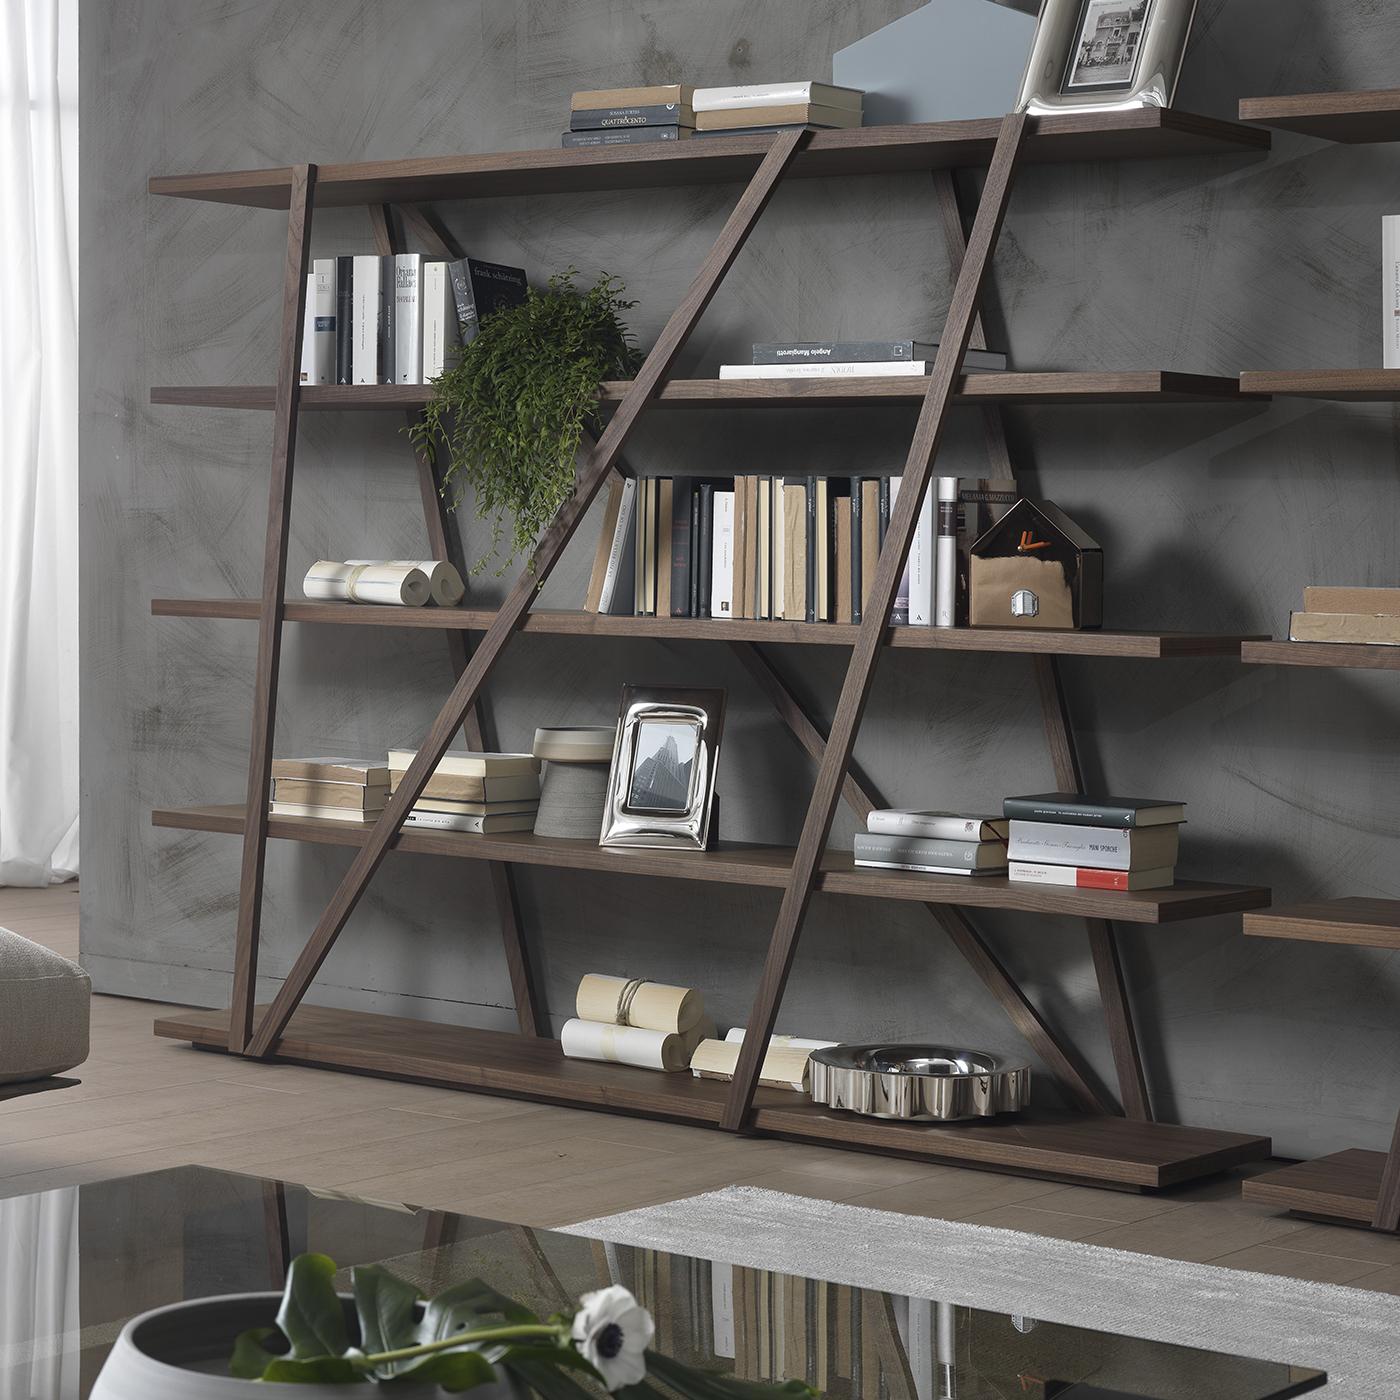 This dynamic and elegant design by Norberto Delfinetti and Monica Bernasconi is part of the Tres collection and features a vertical and diagonal structure in aluminum, veneered in Canaletto walnut and five wooden shelves with a Canaletto walnut